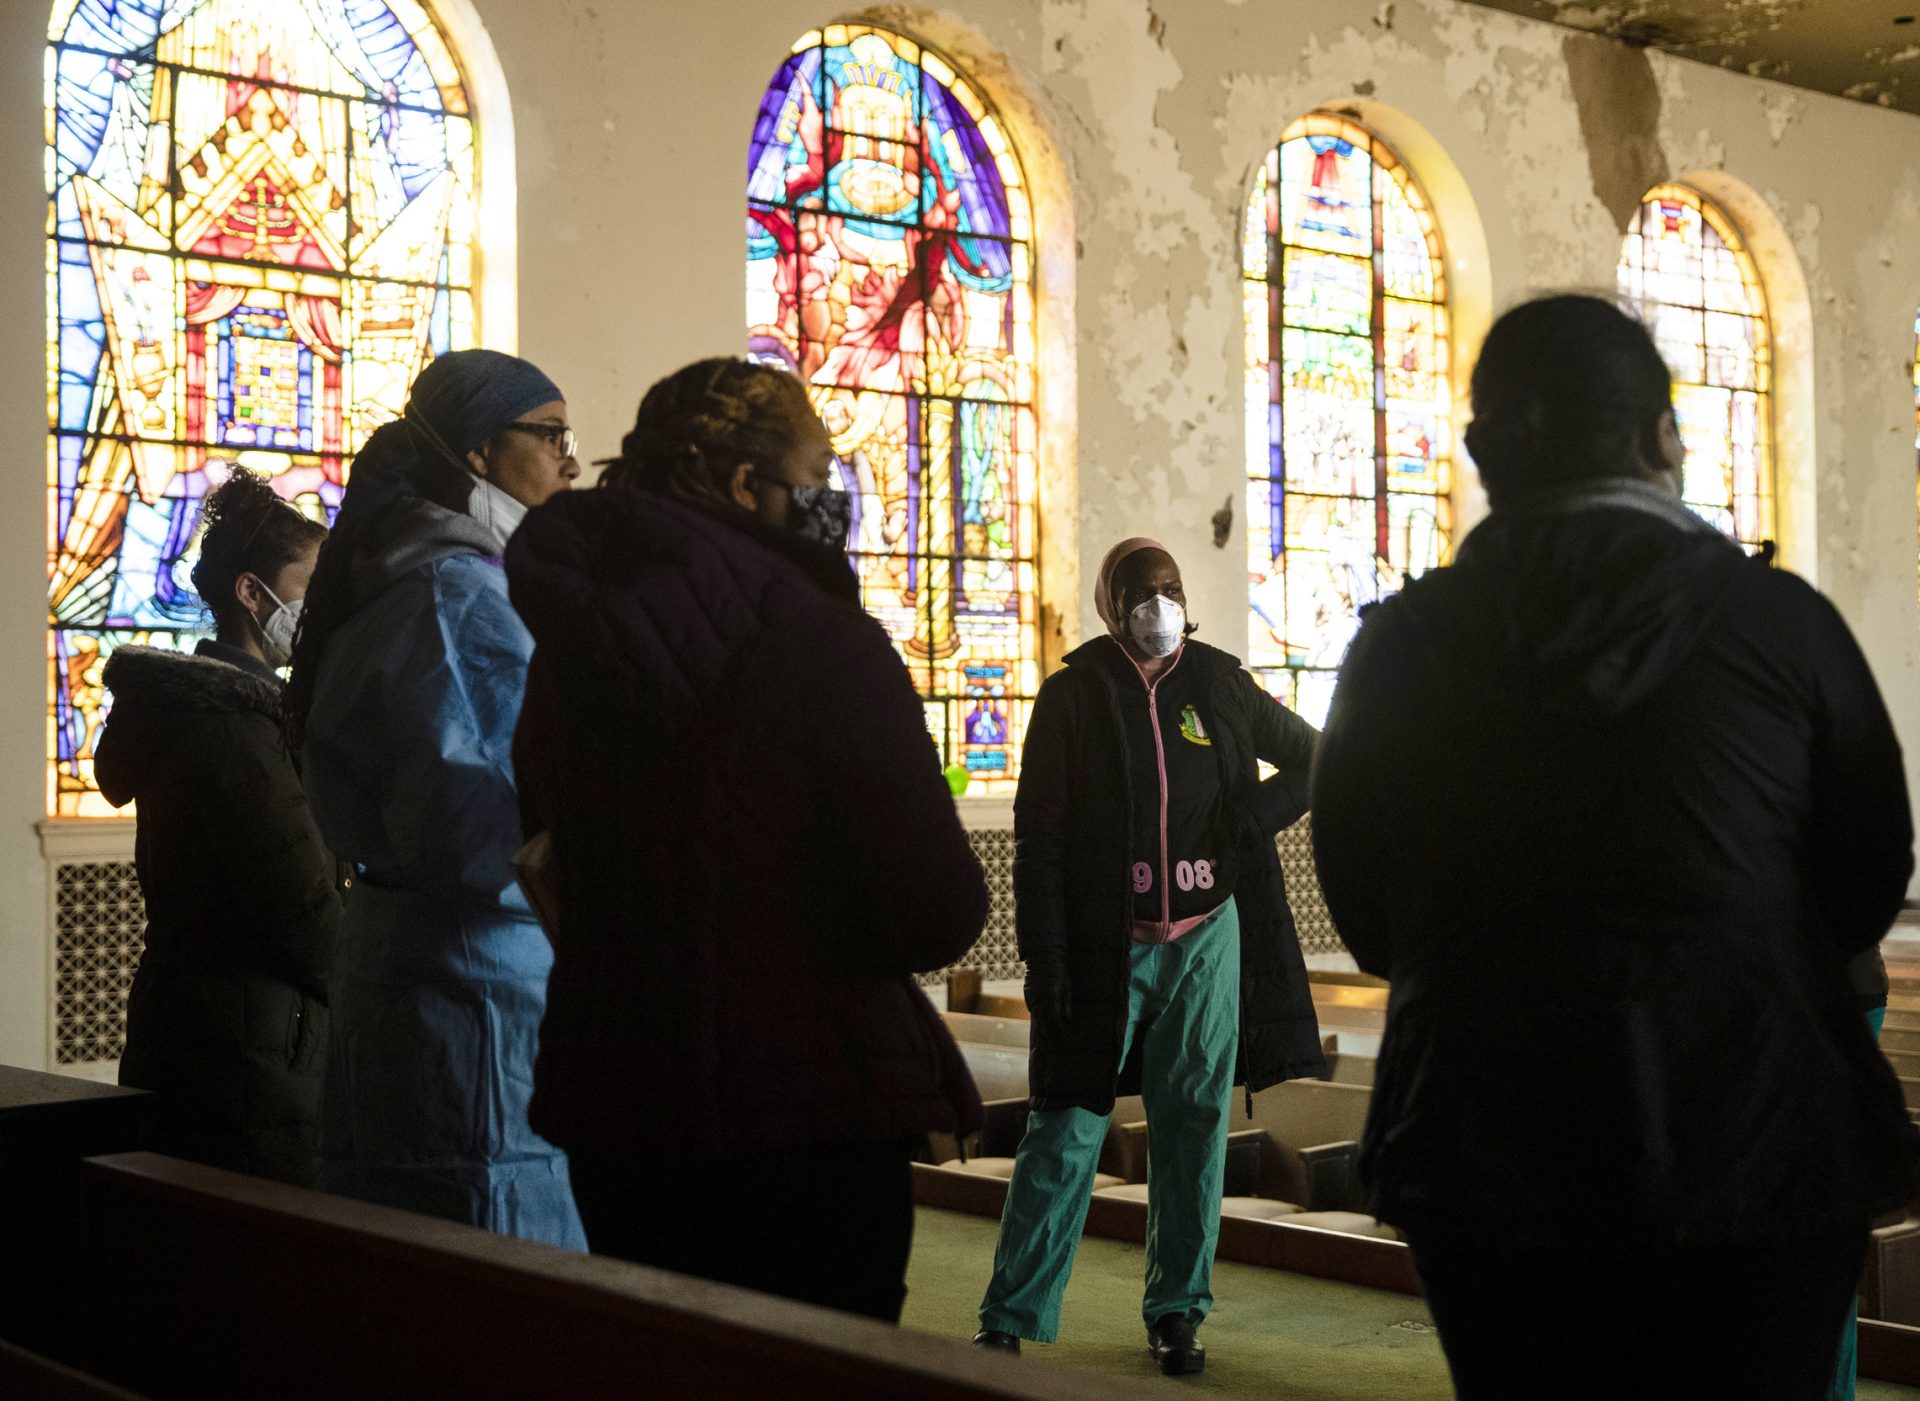 Stanford speaks with volunteers ahead of the opening of a "barrier free" COVID-19 test location outside Pinn Memorial Baptist Church in Philadelphia in April.